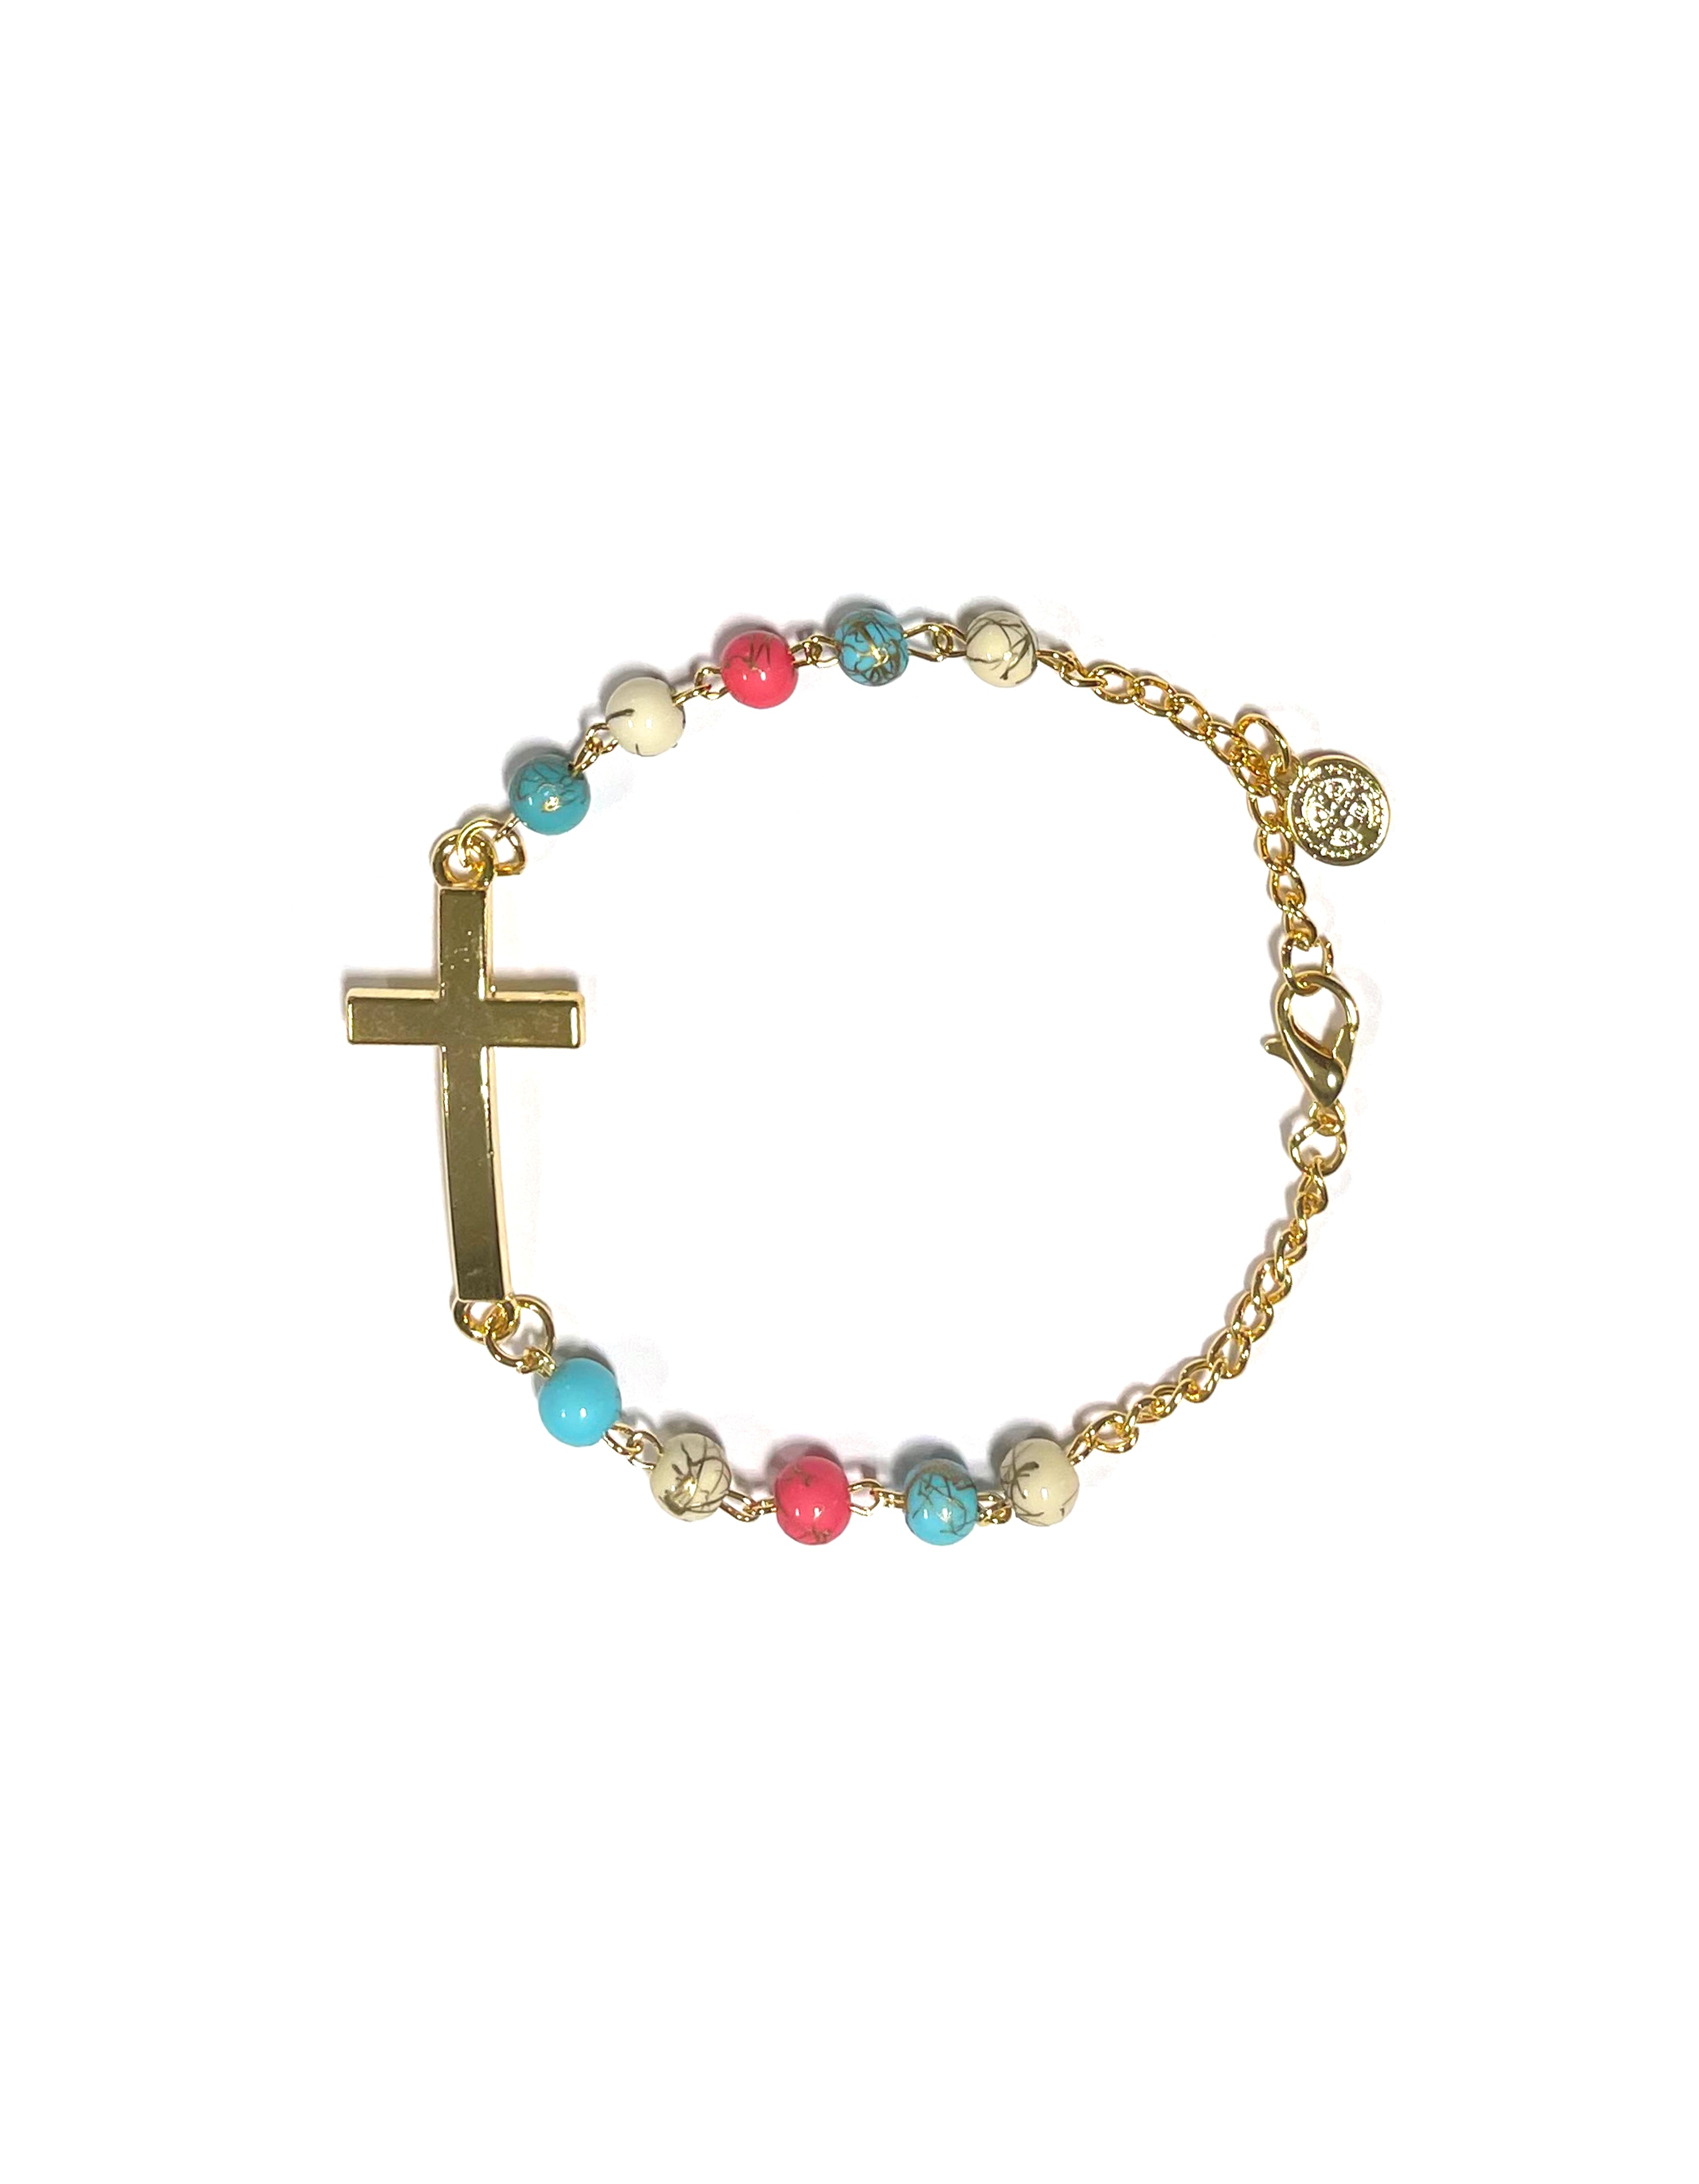 Bracelet with colorful stones beads and golden cross